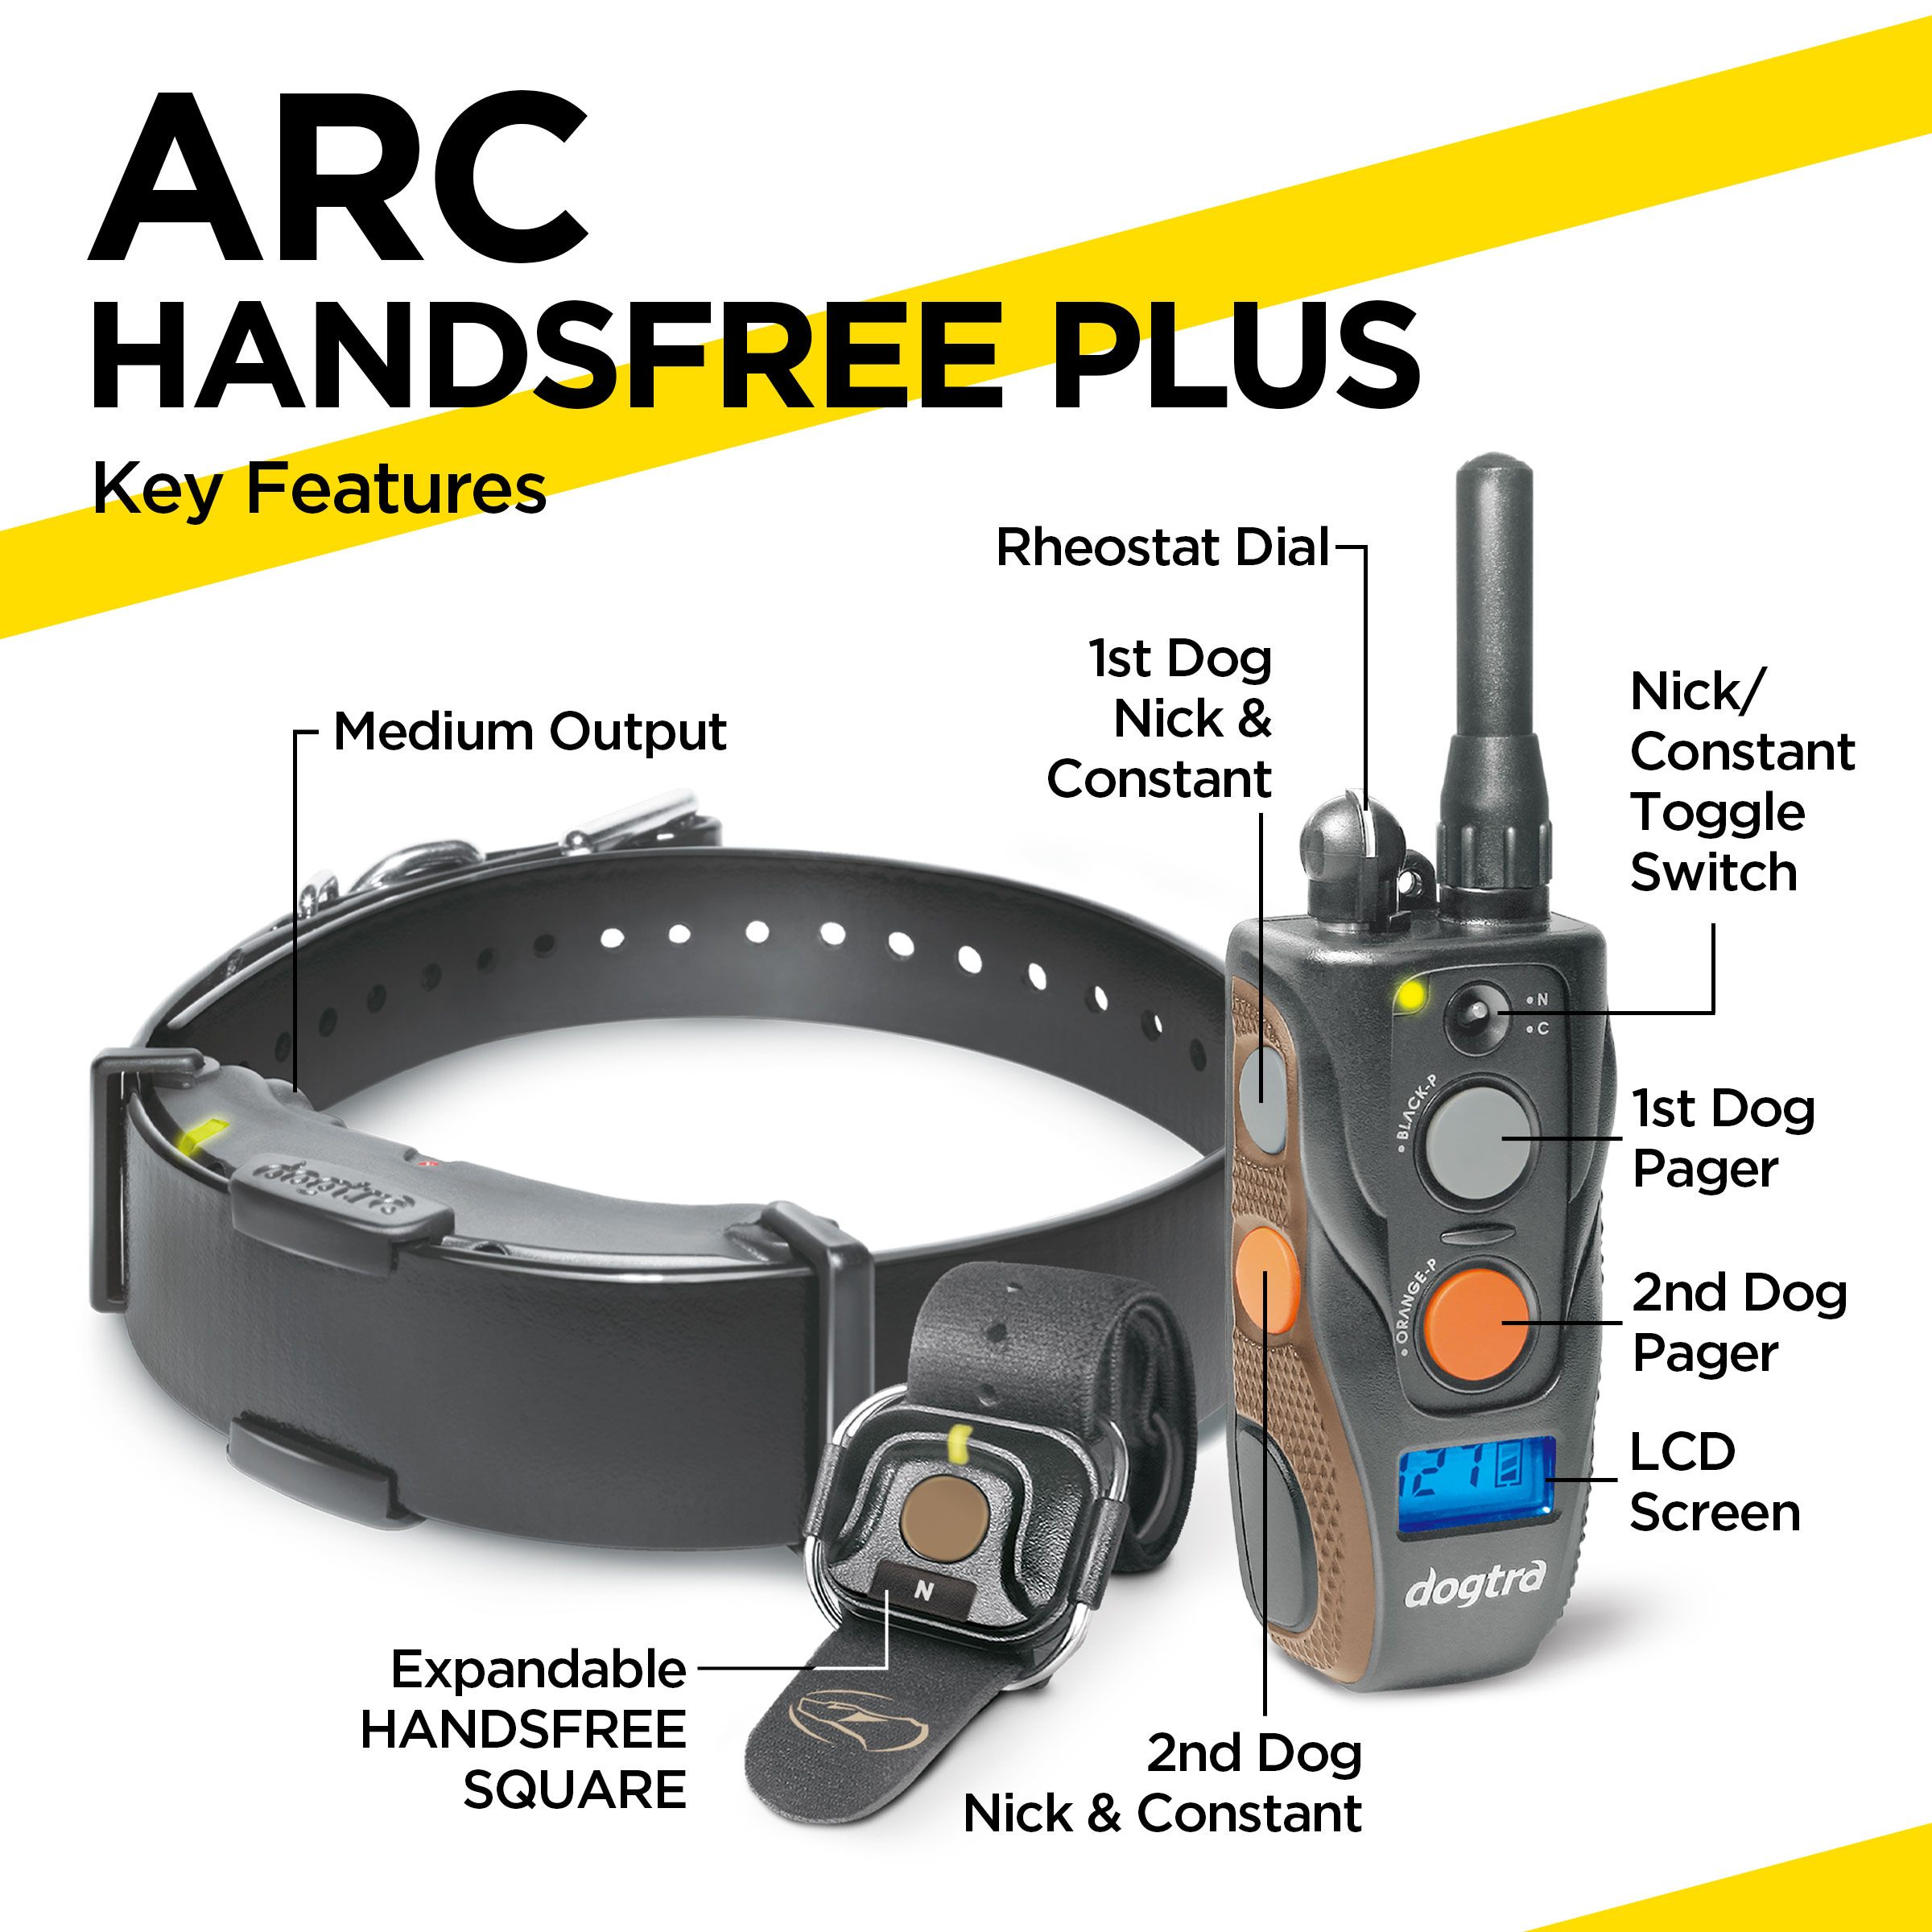 NEW Dogtra ARC HANDSFREE 3/4-Mile Remote Dog Training Controller Waterproof 